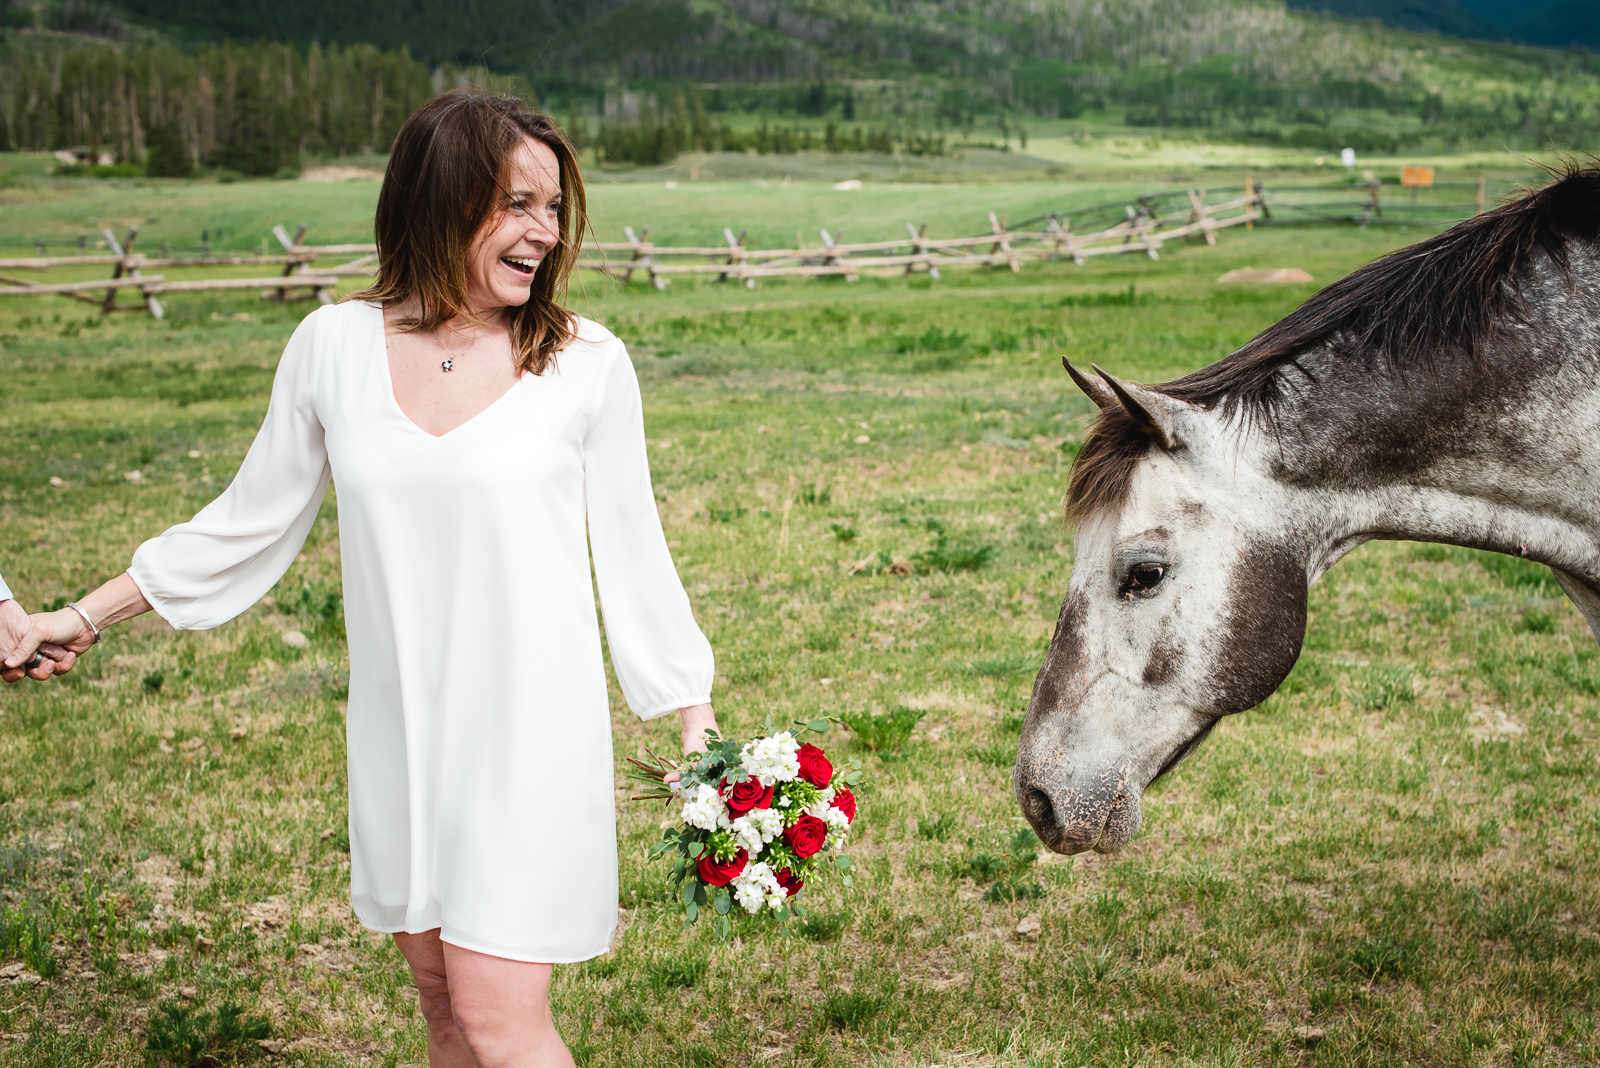 An Exceptional Devil's Thumb Wedding | Wedding Photo | Devil's Thumb Ranch| From the Hip Photo